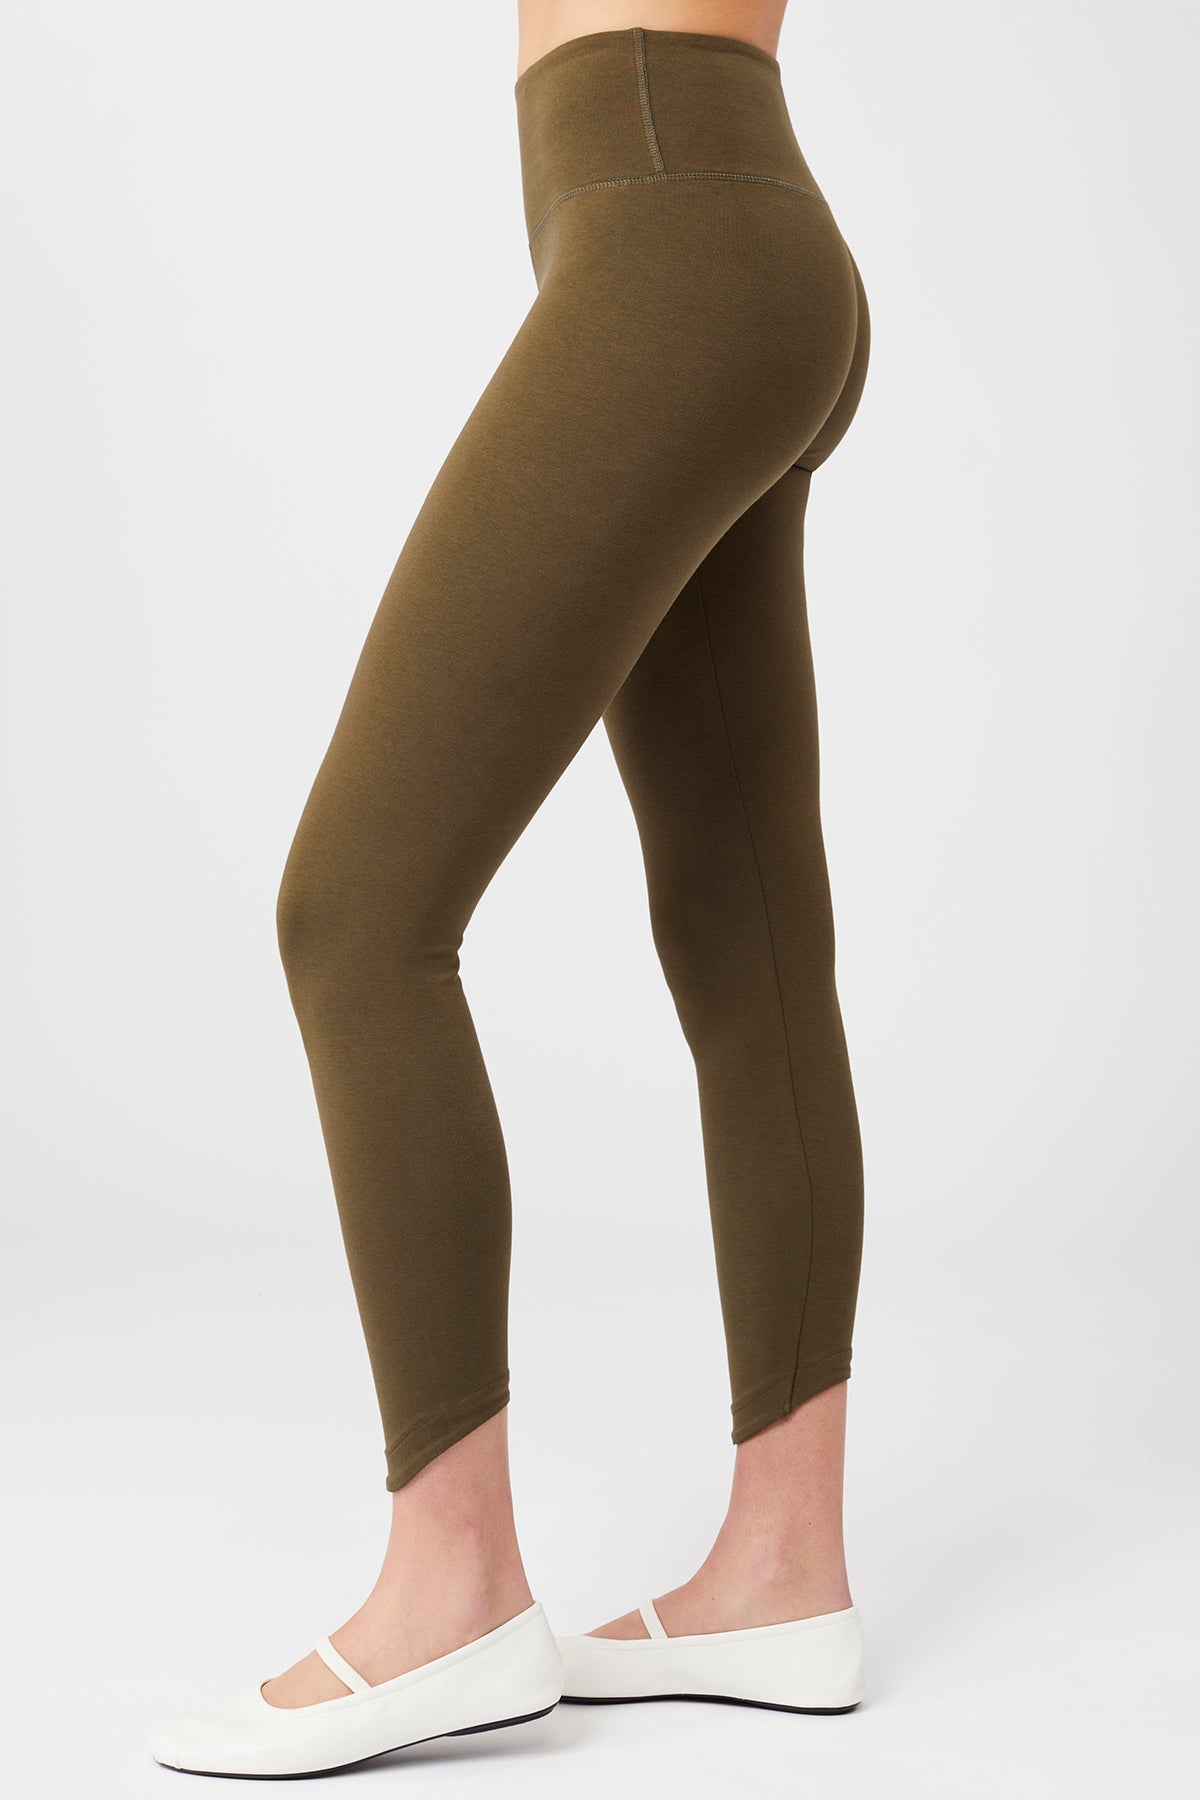 Brown Colour Leggings | Find Your Perfect Match